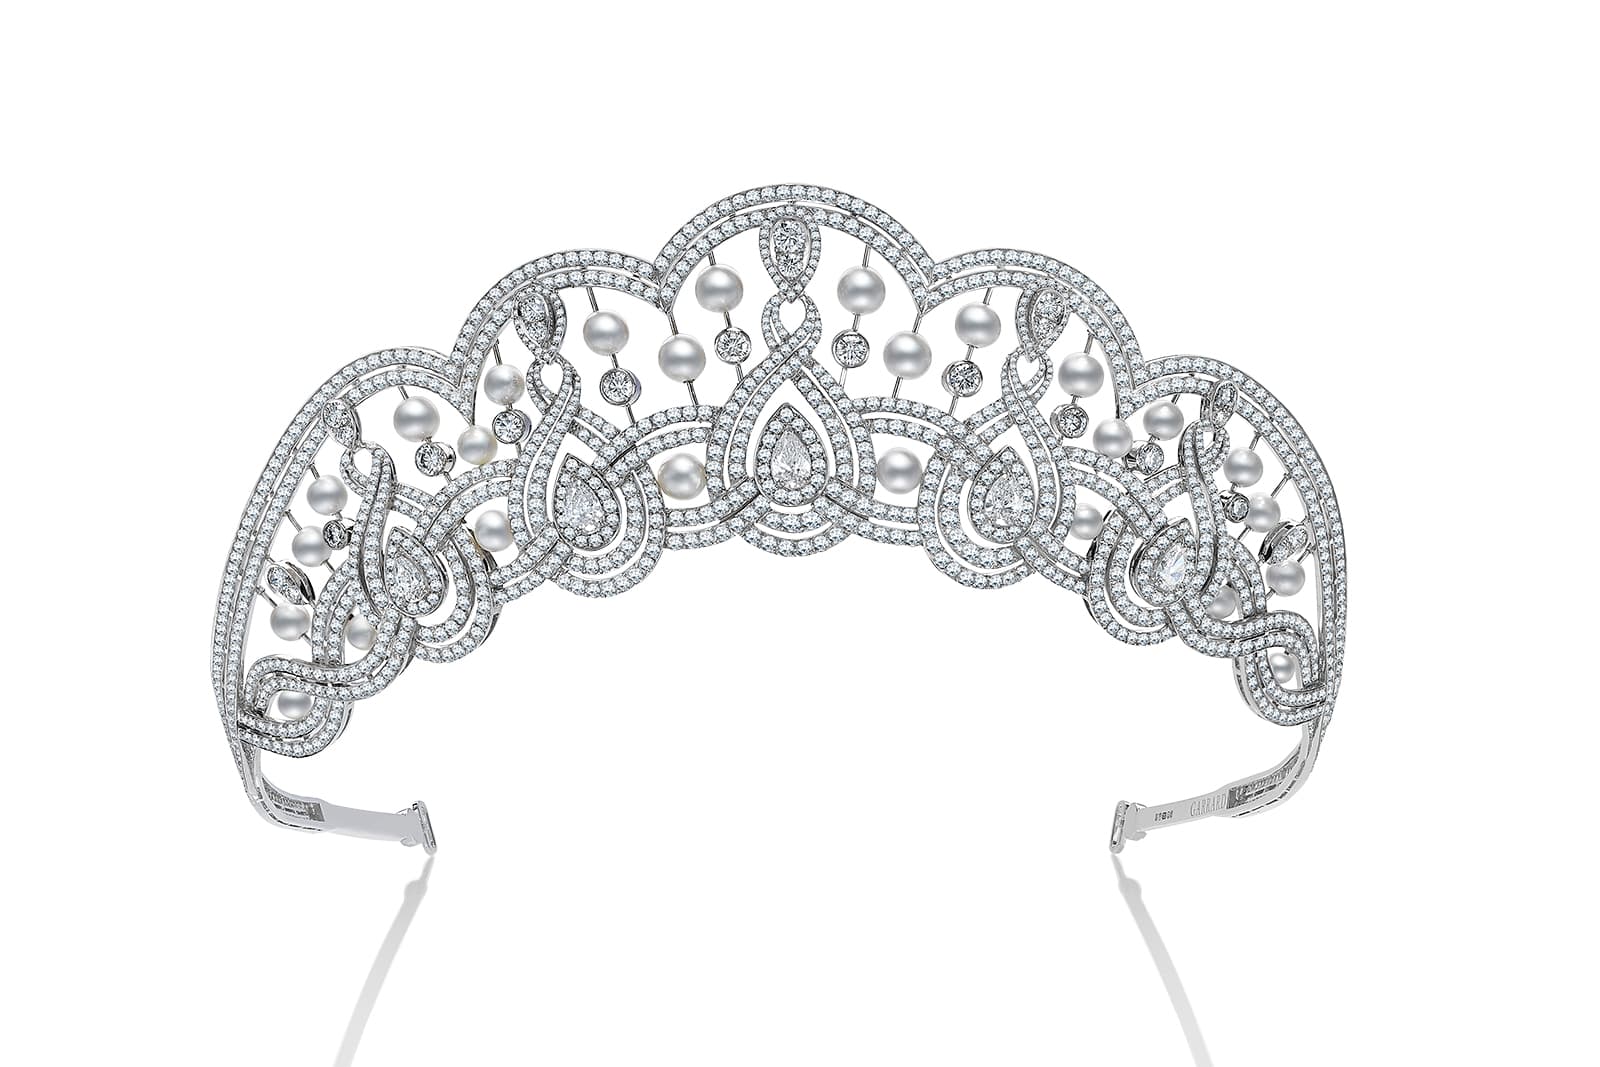 Garrard tiara with pearls and diamonds in white gold